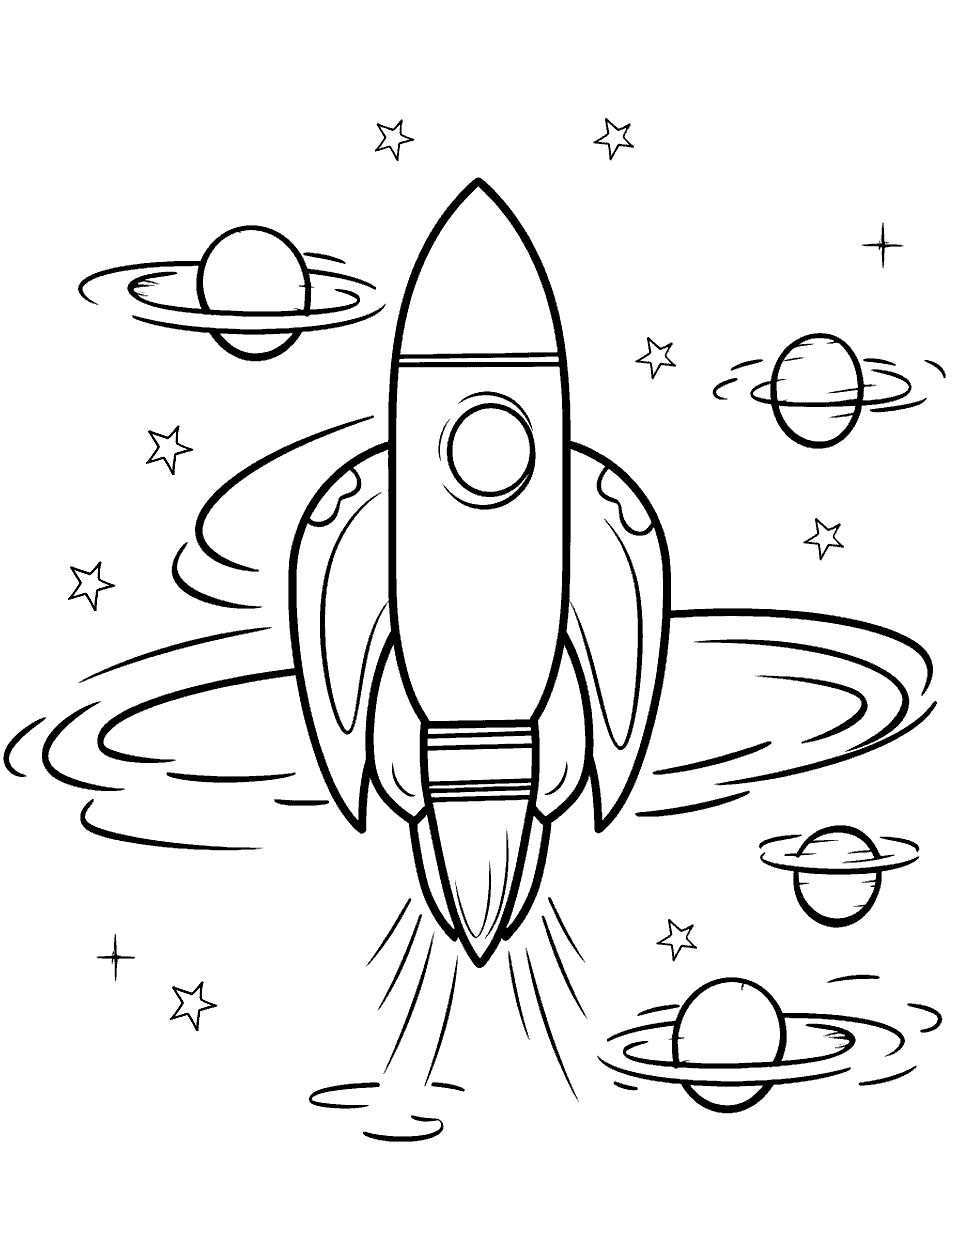 Space Rocket Launch Solar System Coloring Page - A space rocket during lift-off, with flames and smoke.